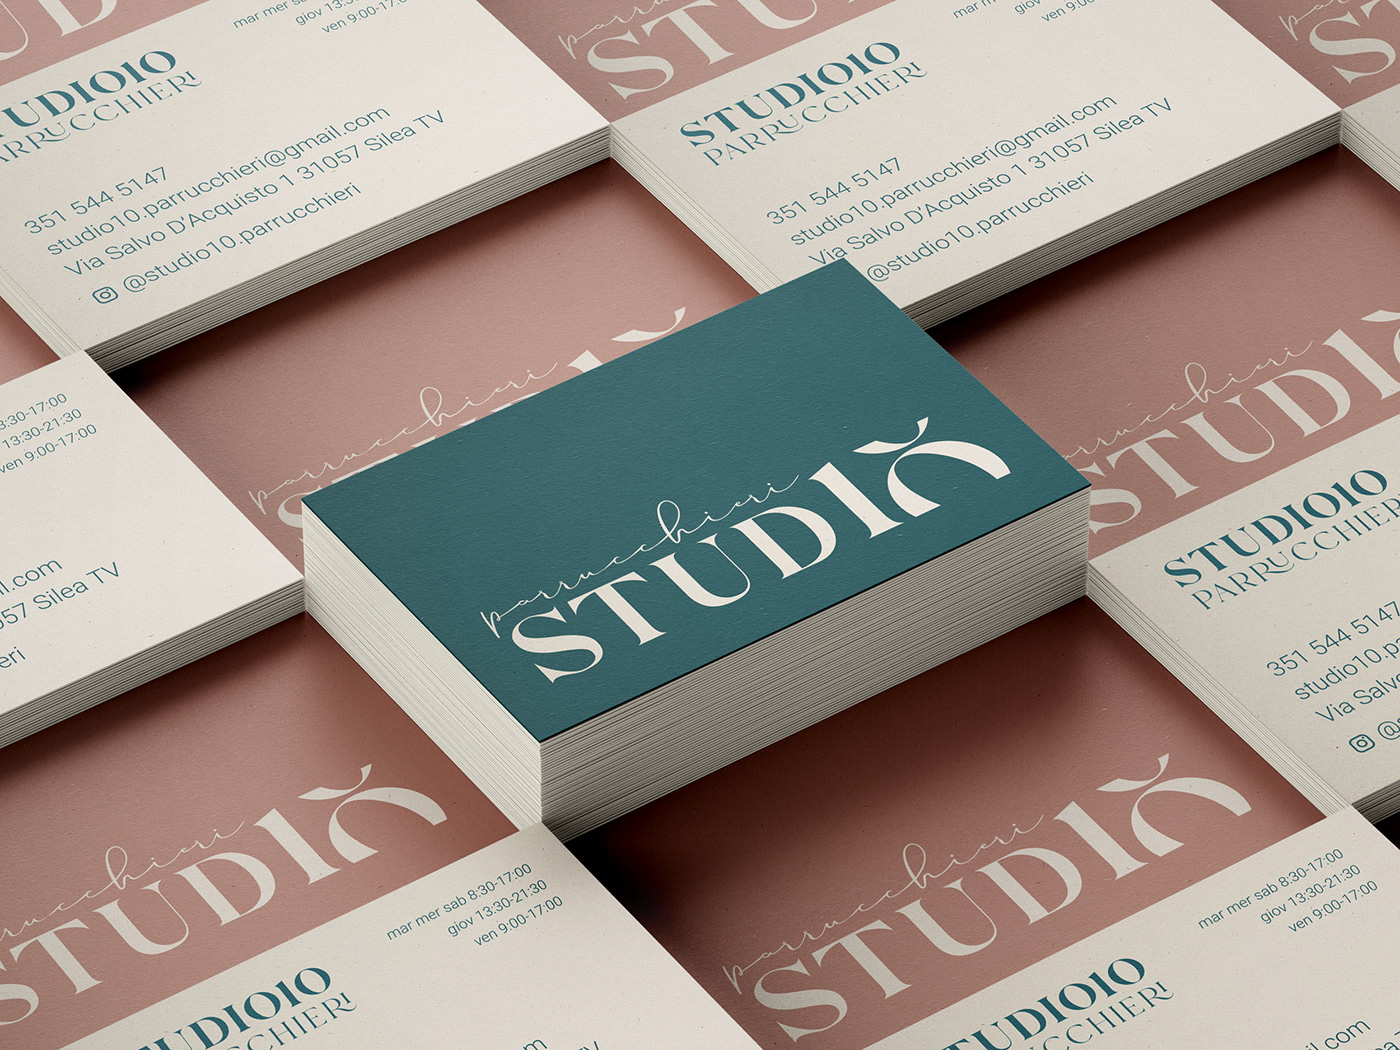 Pink and teal stacked business cards mockup on recycled paper